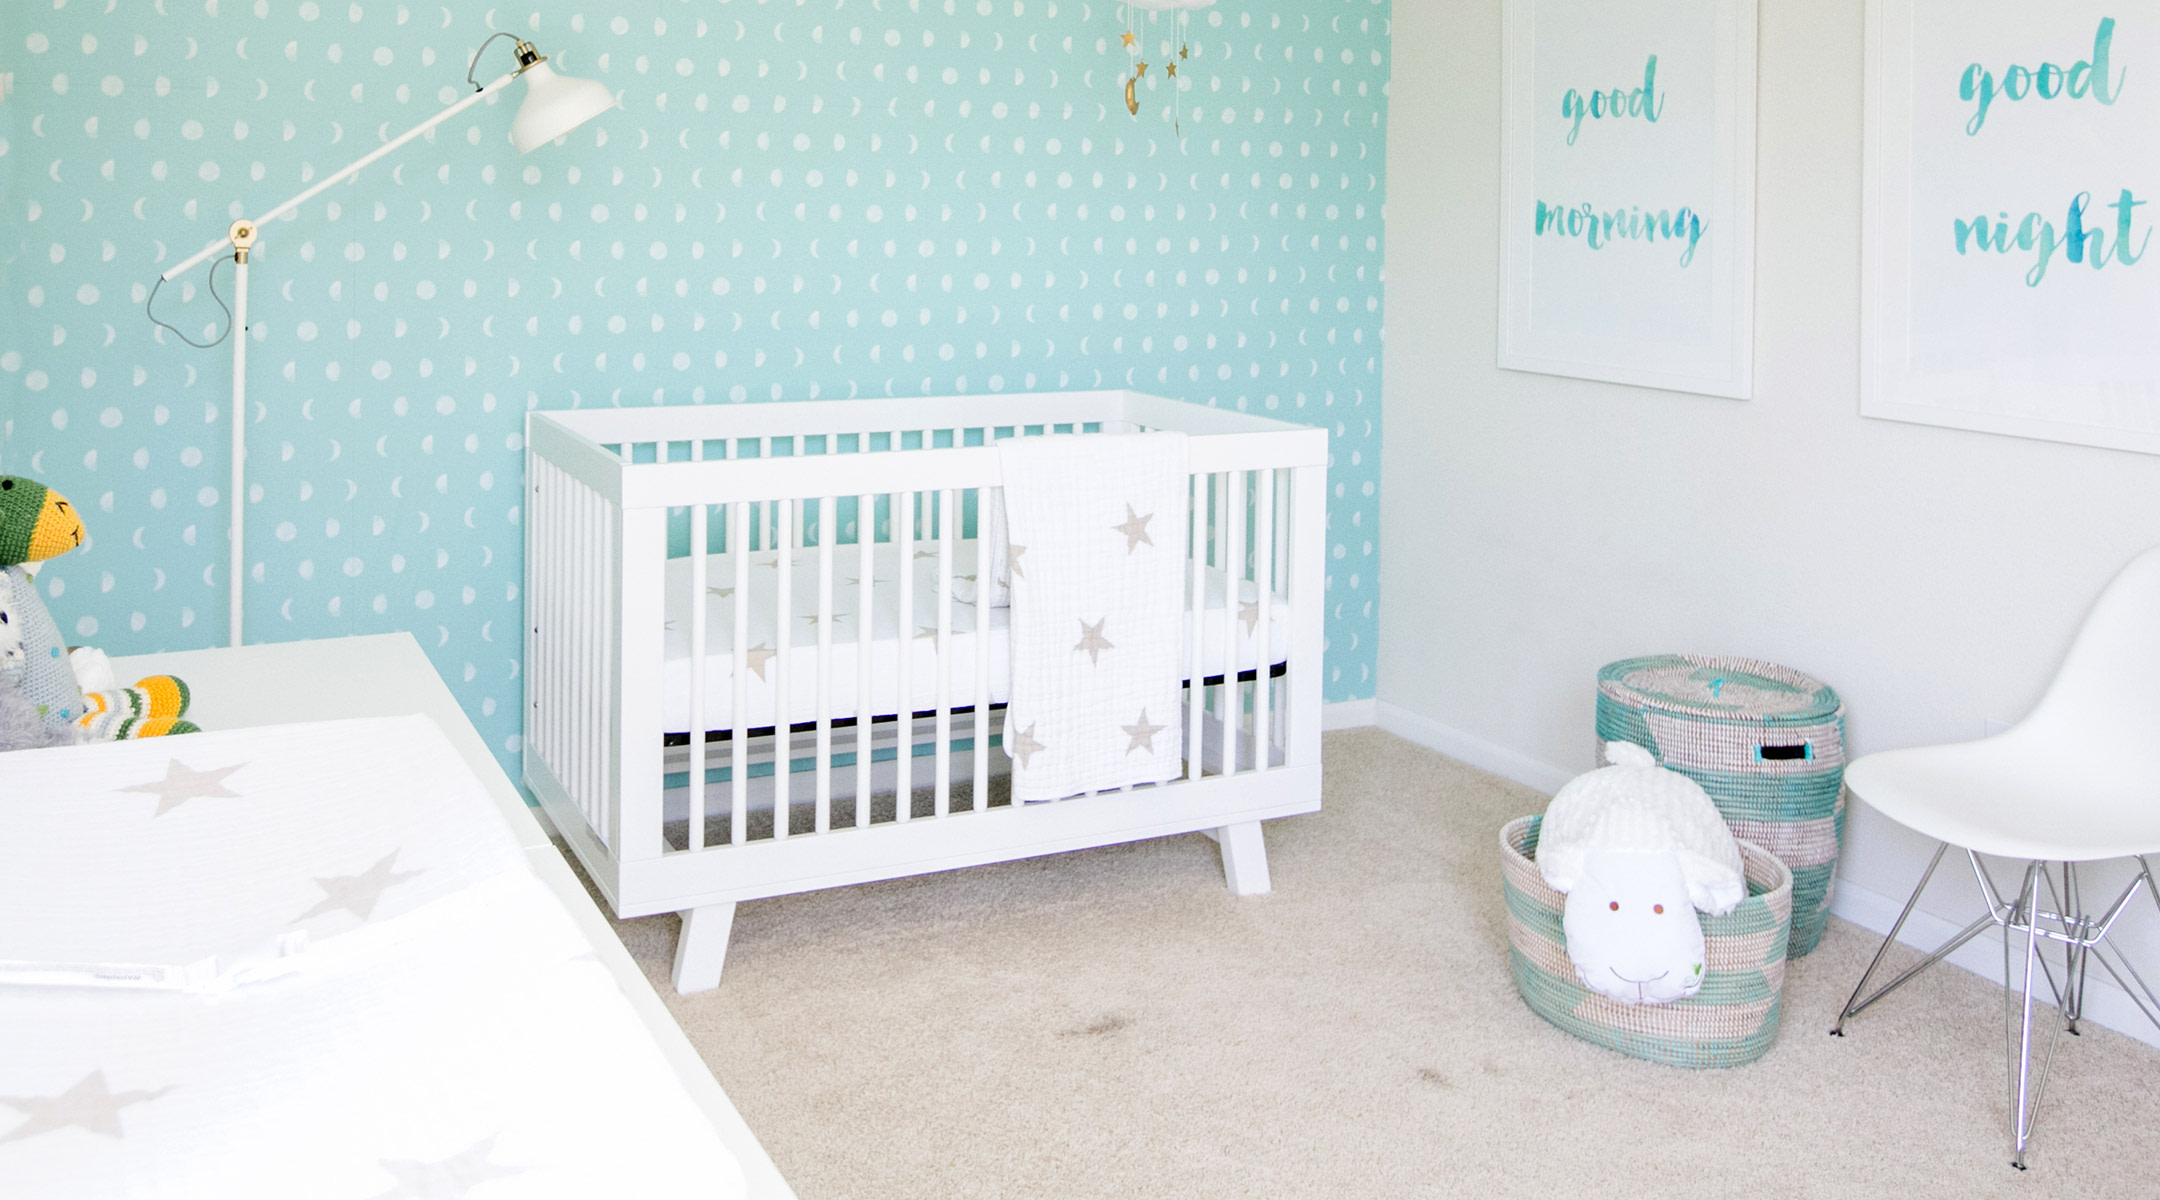 Connie Wong's baby nursery tour